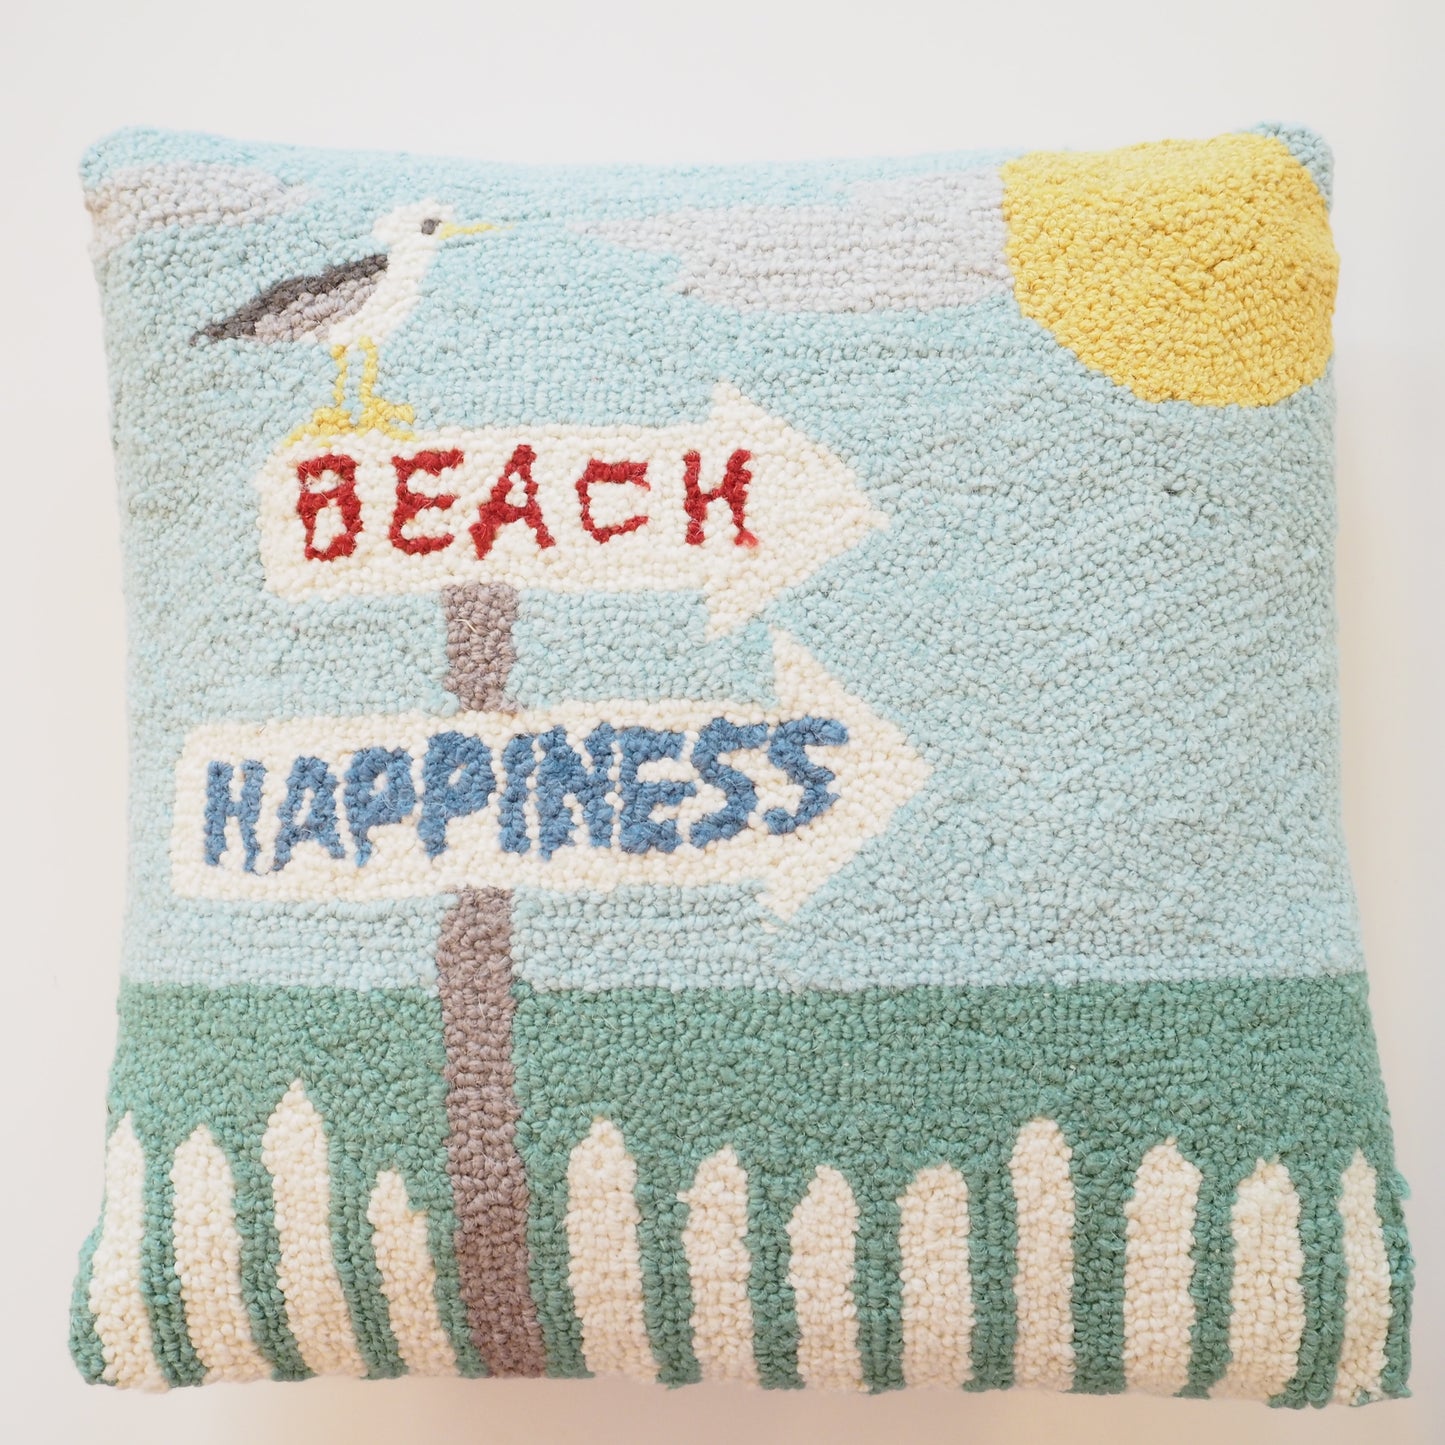 Happiness at the Beach Hooked Pillow